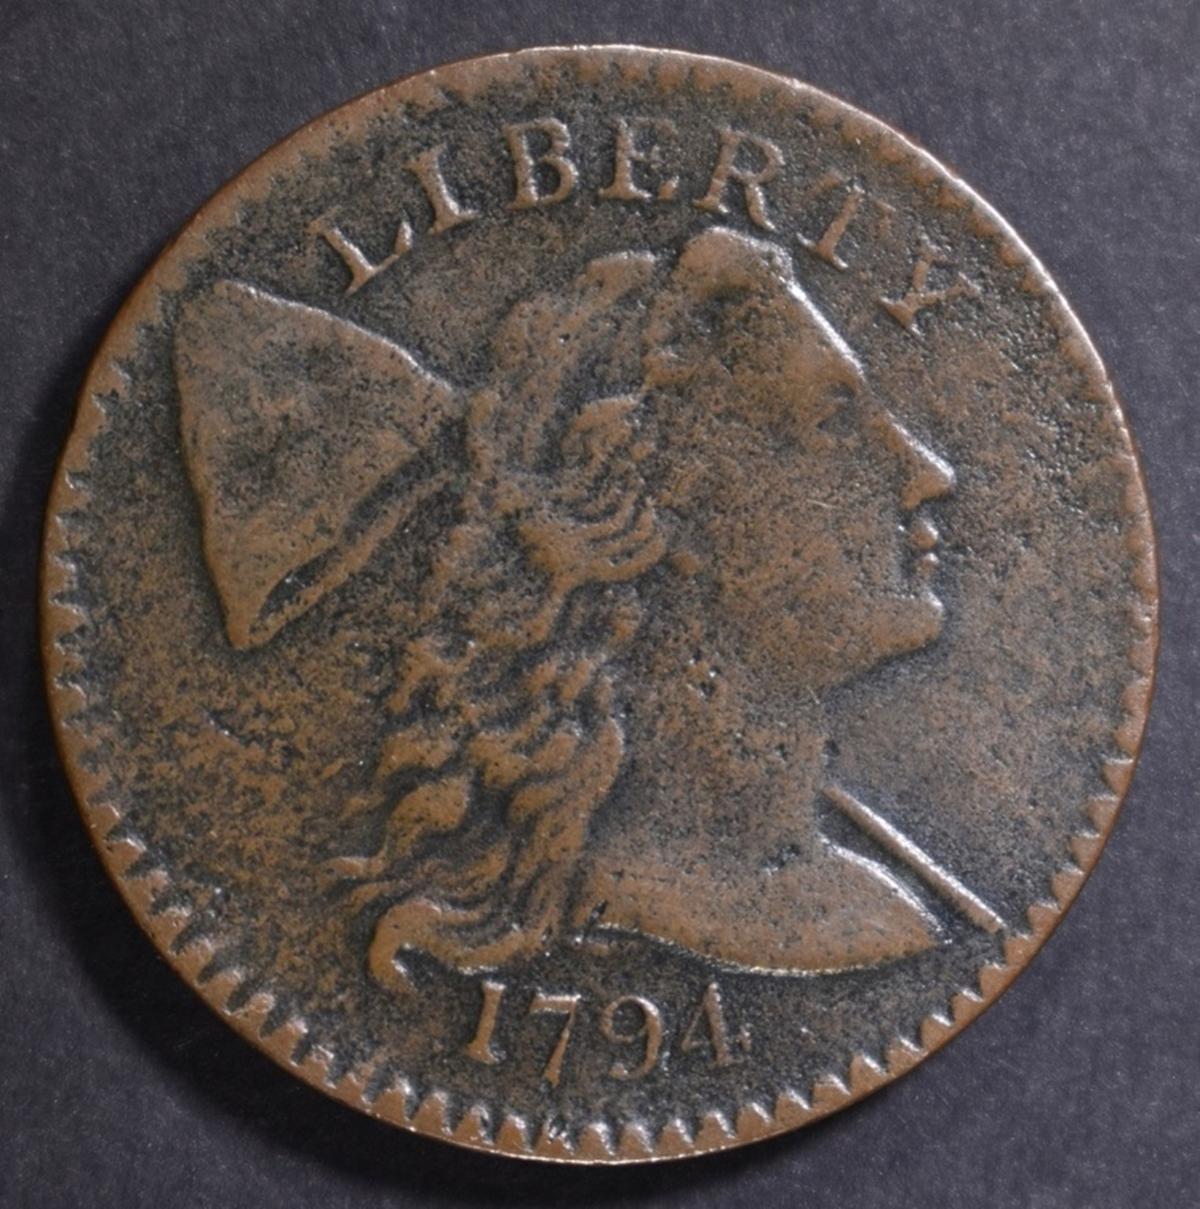 1794 LARGE CENT VF/XF